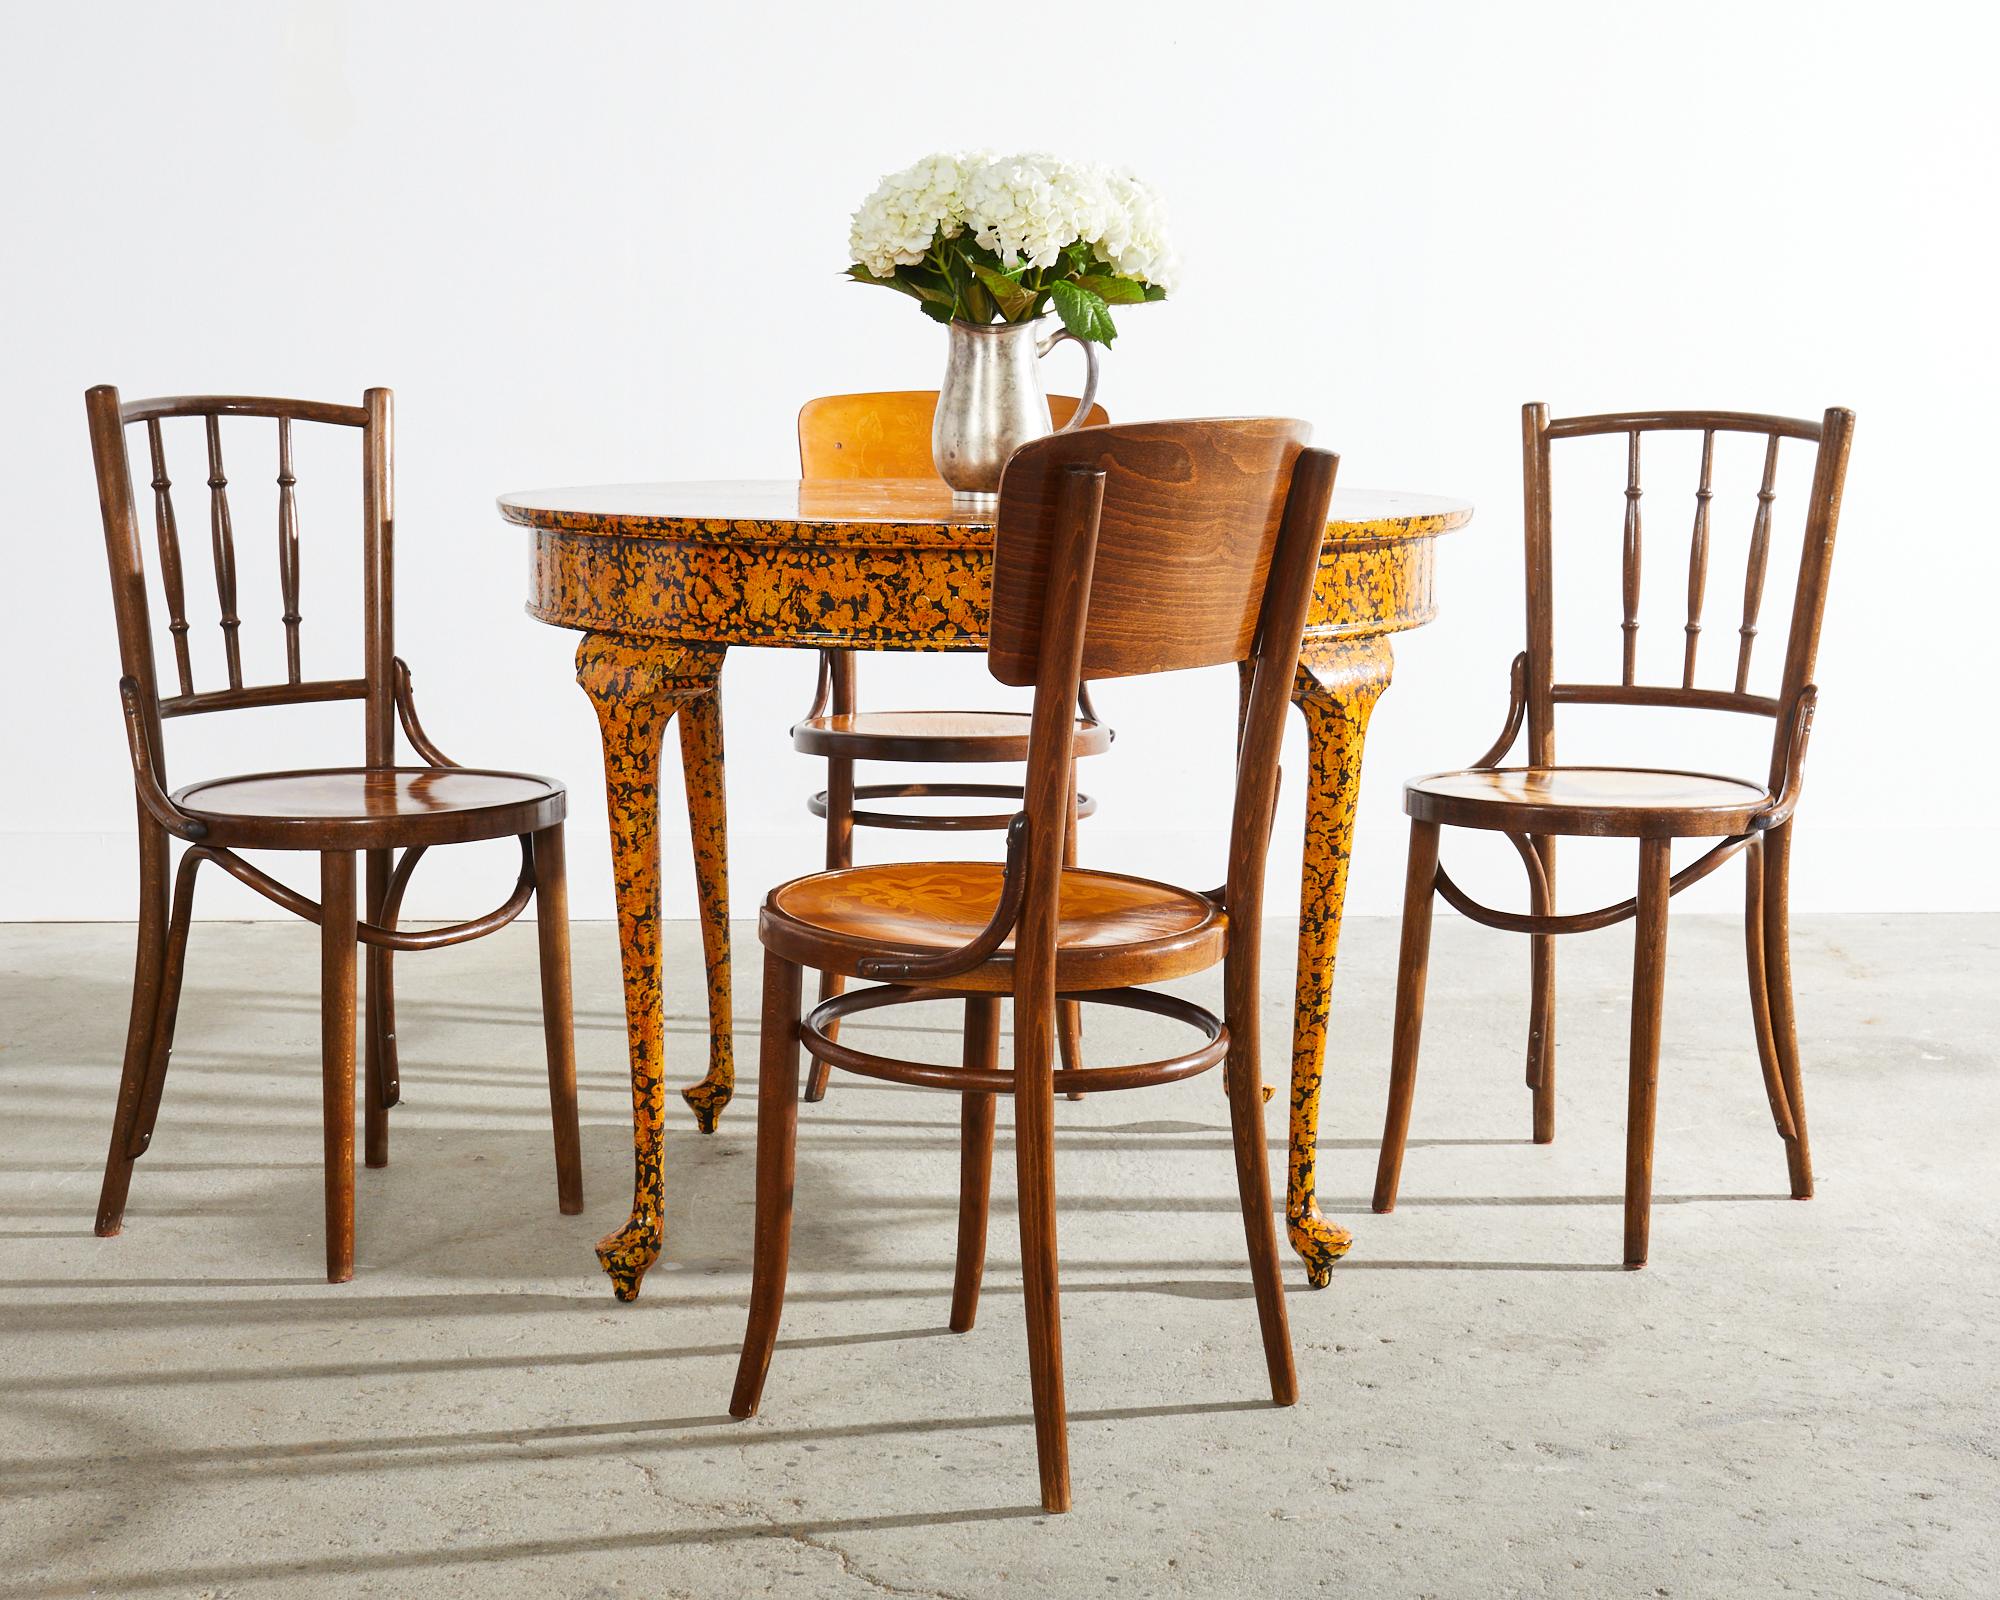 Assembled set of four art nouveau period bentwood cafe bistro dining chairs by Mundus for Thonet. Made in Czech Republic the set consists of two chairs with a spindle back and two chairs with a shaped back having a floral motif. Each chair has a